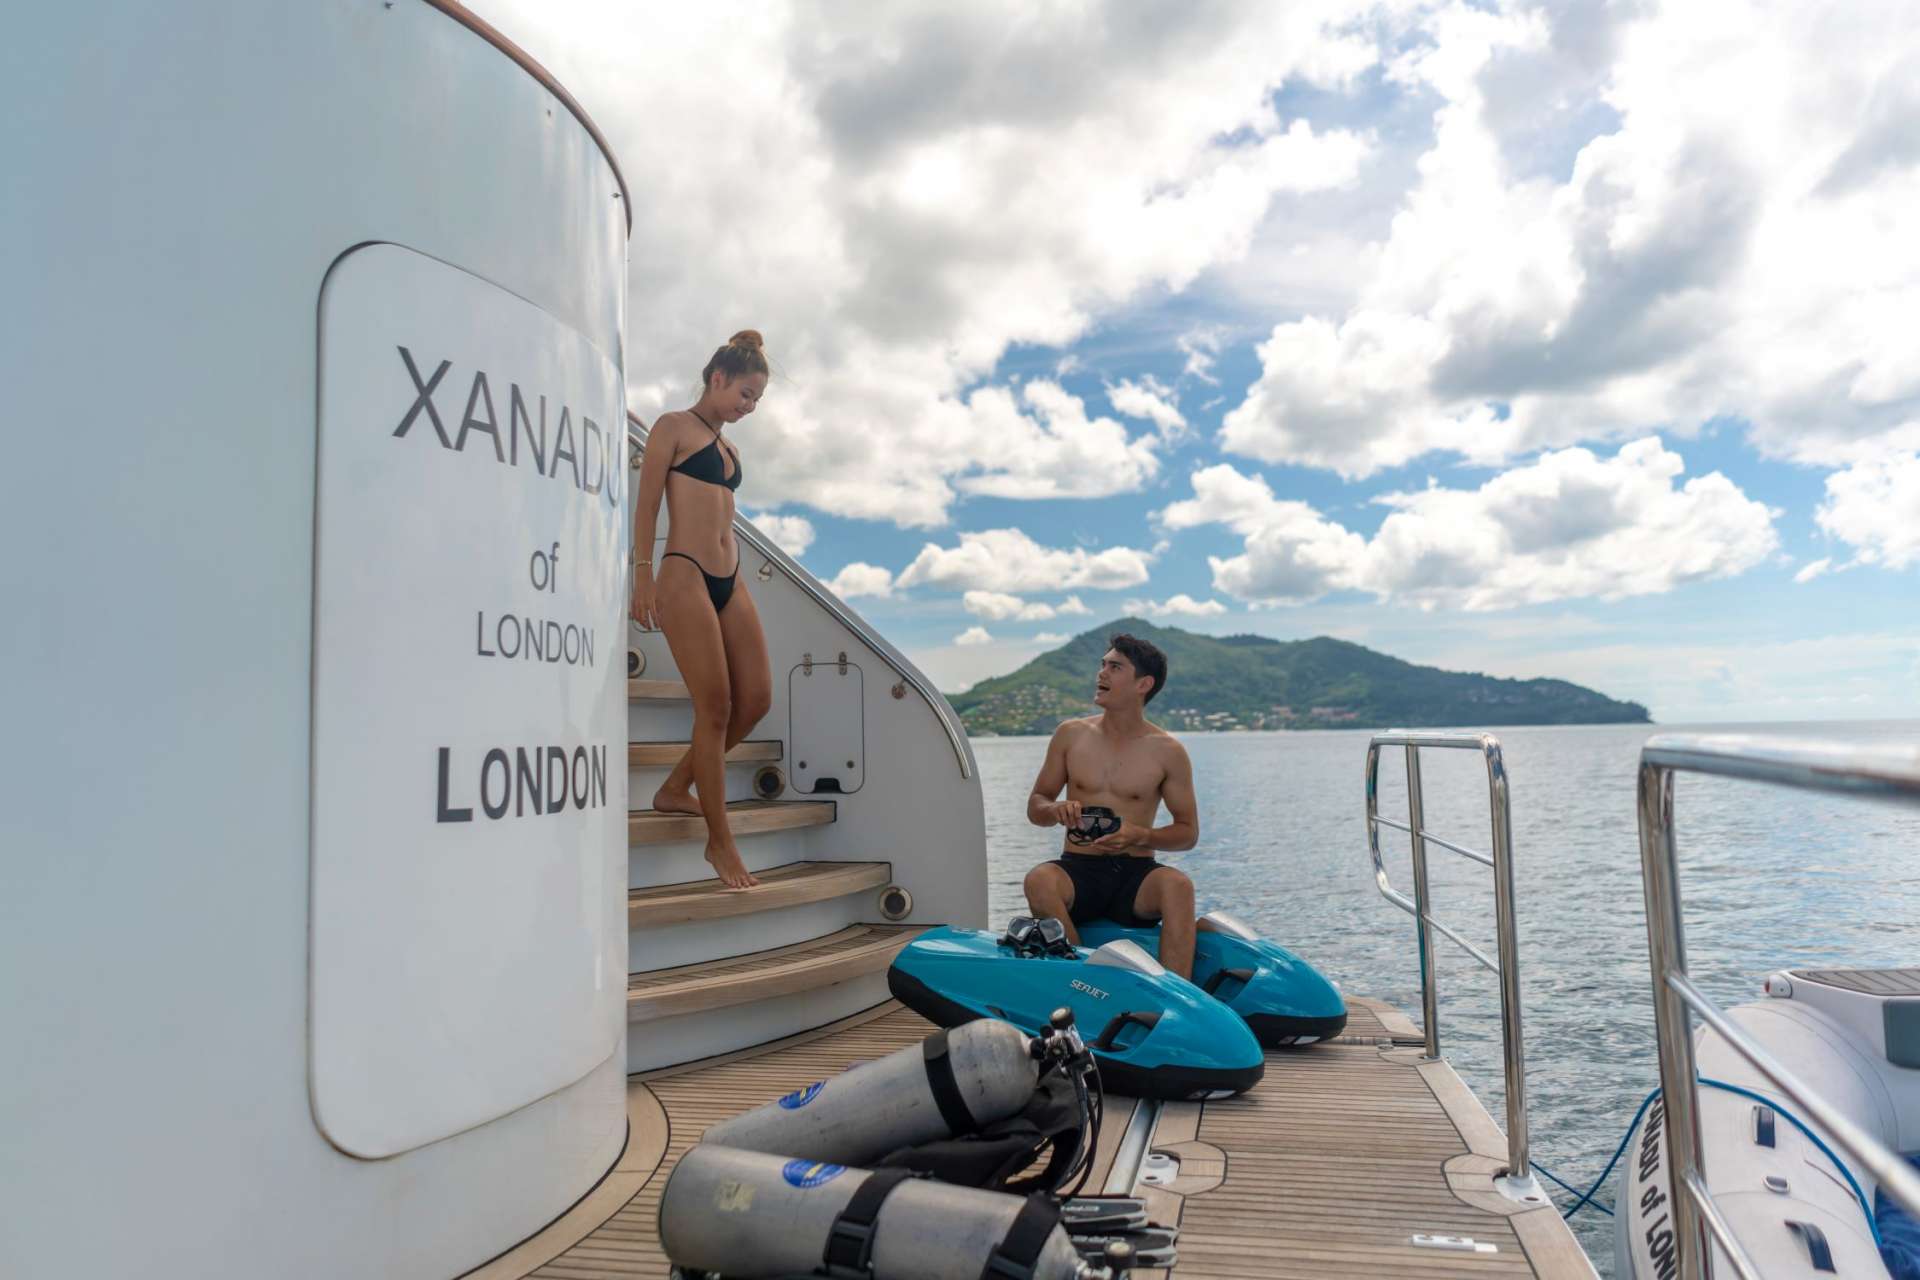 xanadu of london - Superyacht charter Thailand & Boat hire in SE Asia 5